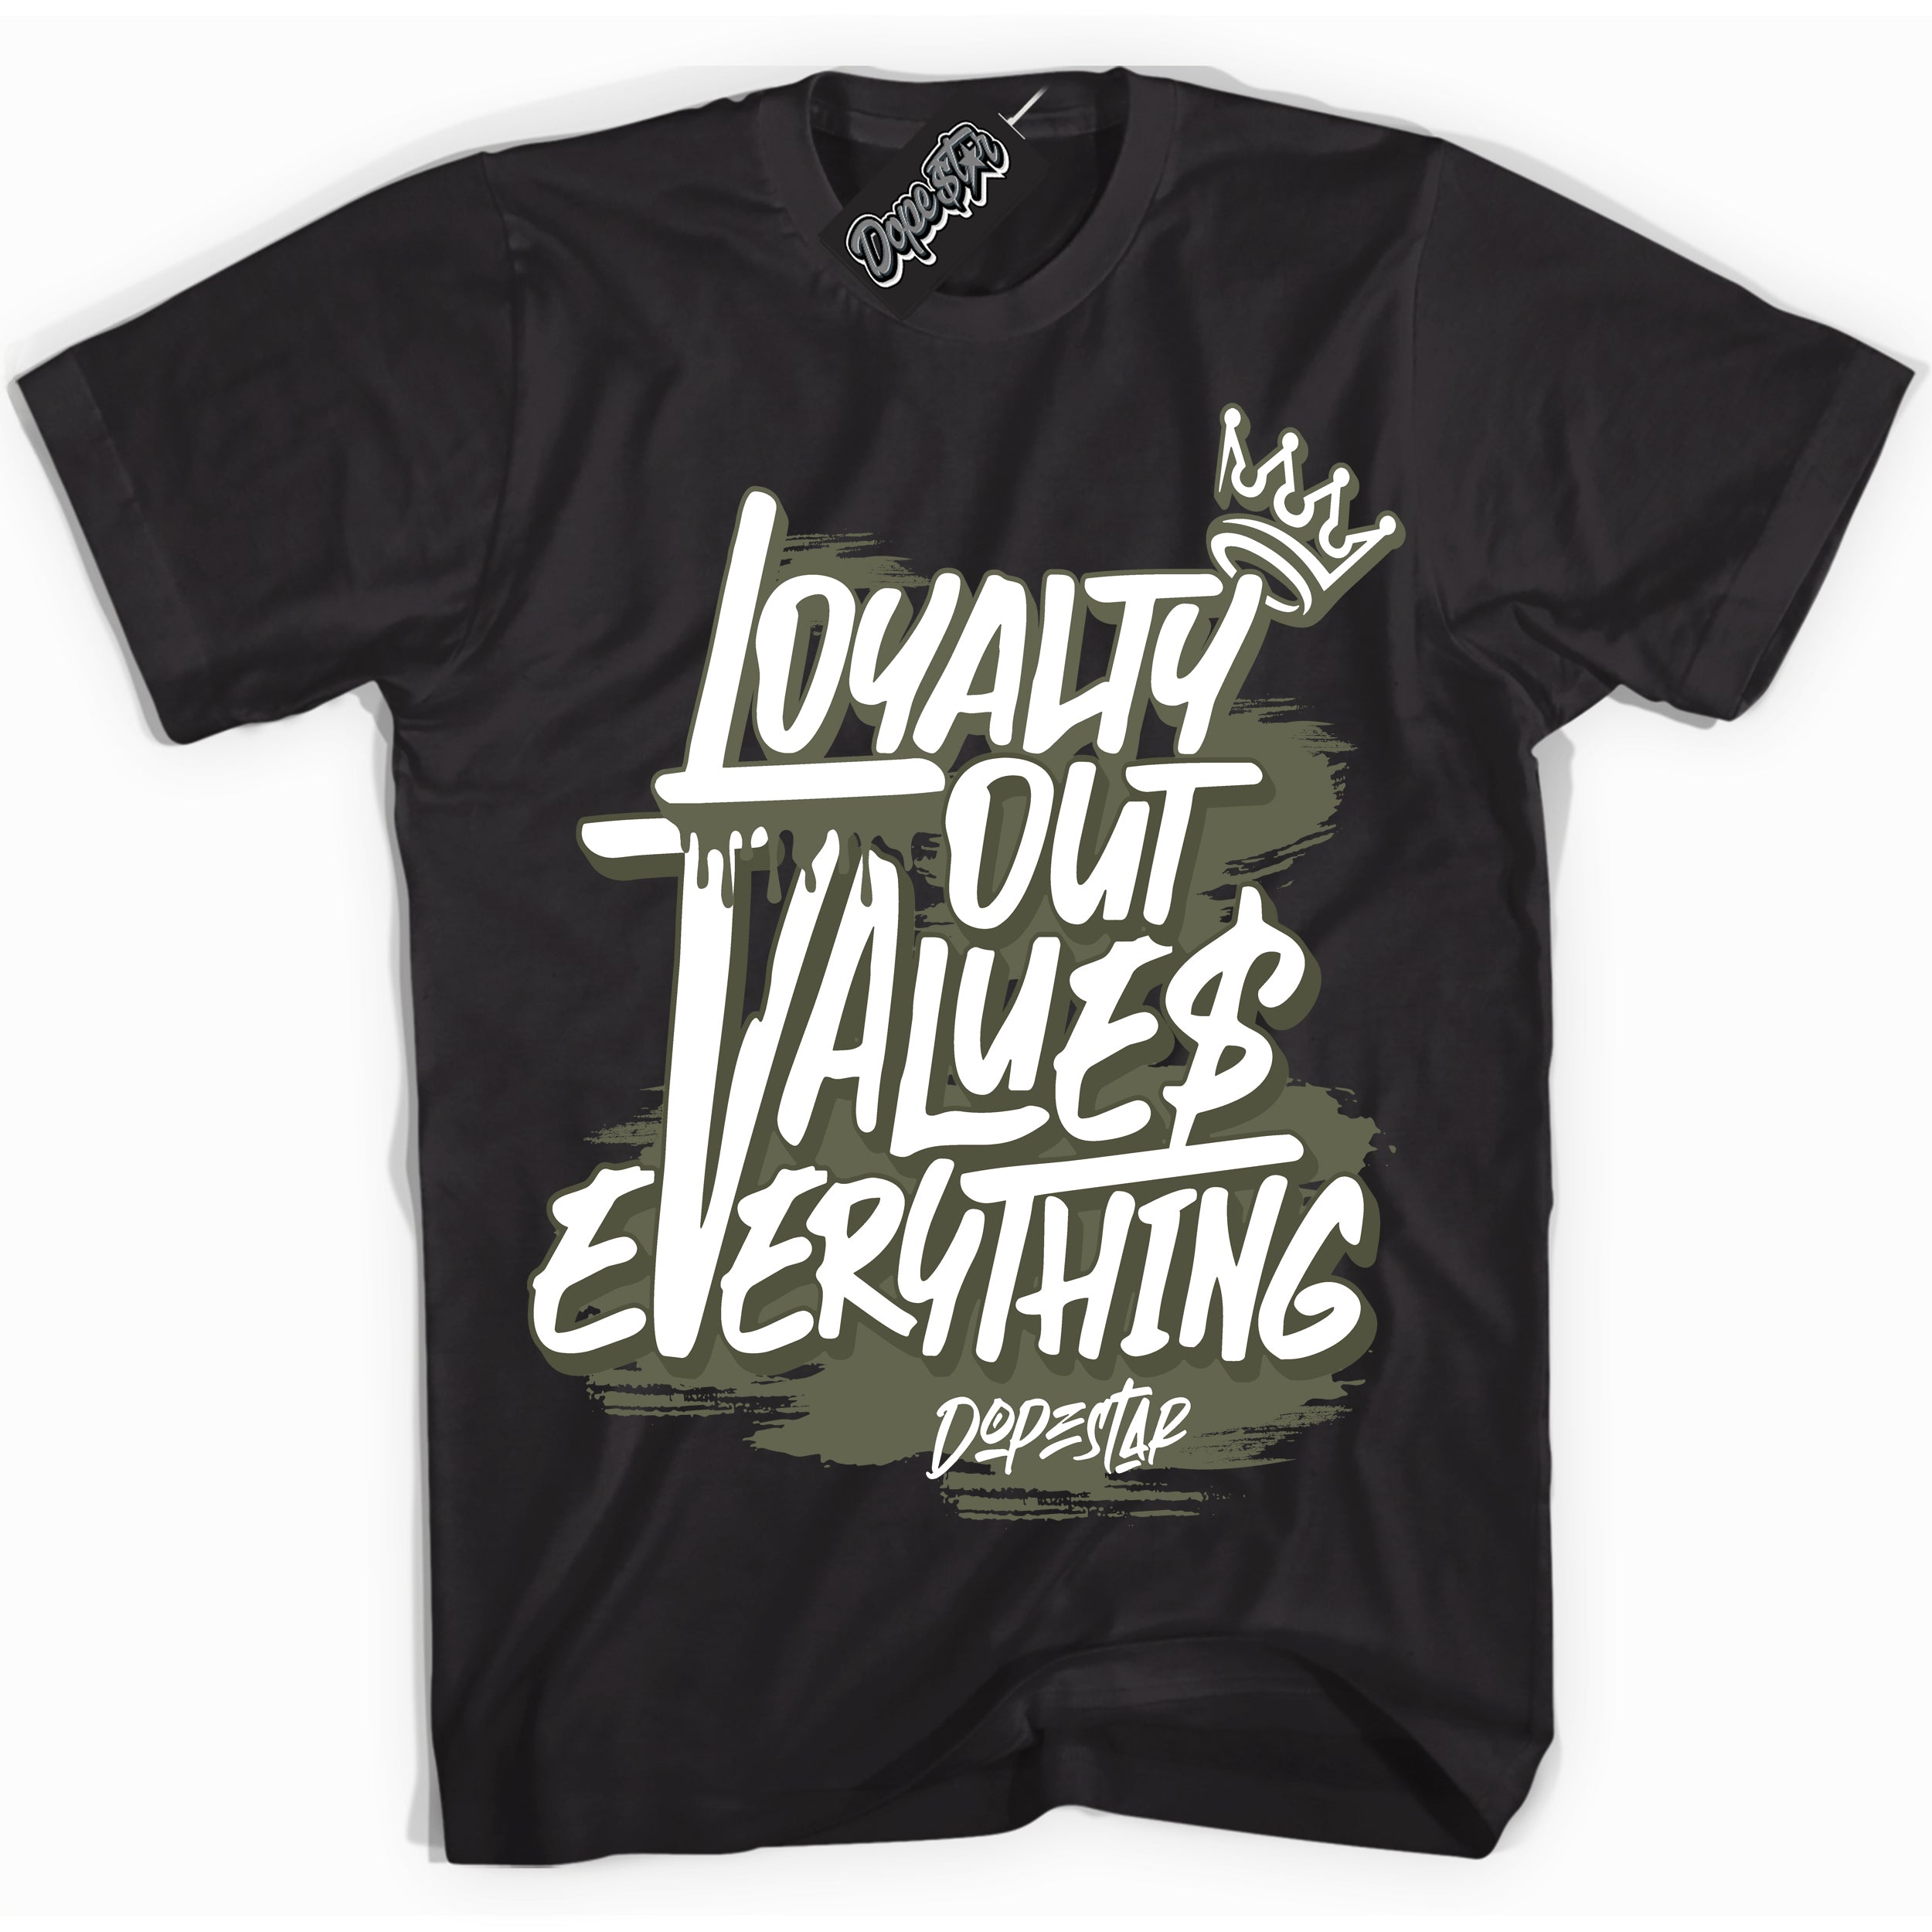 Cool Black Shirt with “ Loyalty Out Values Everything” design that perfectly matches Olive Sneakers.